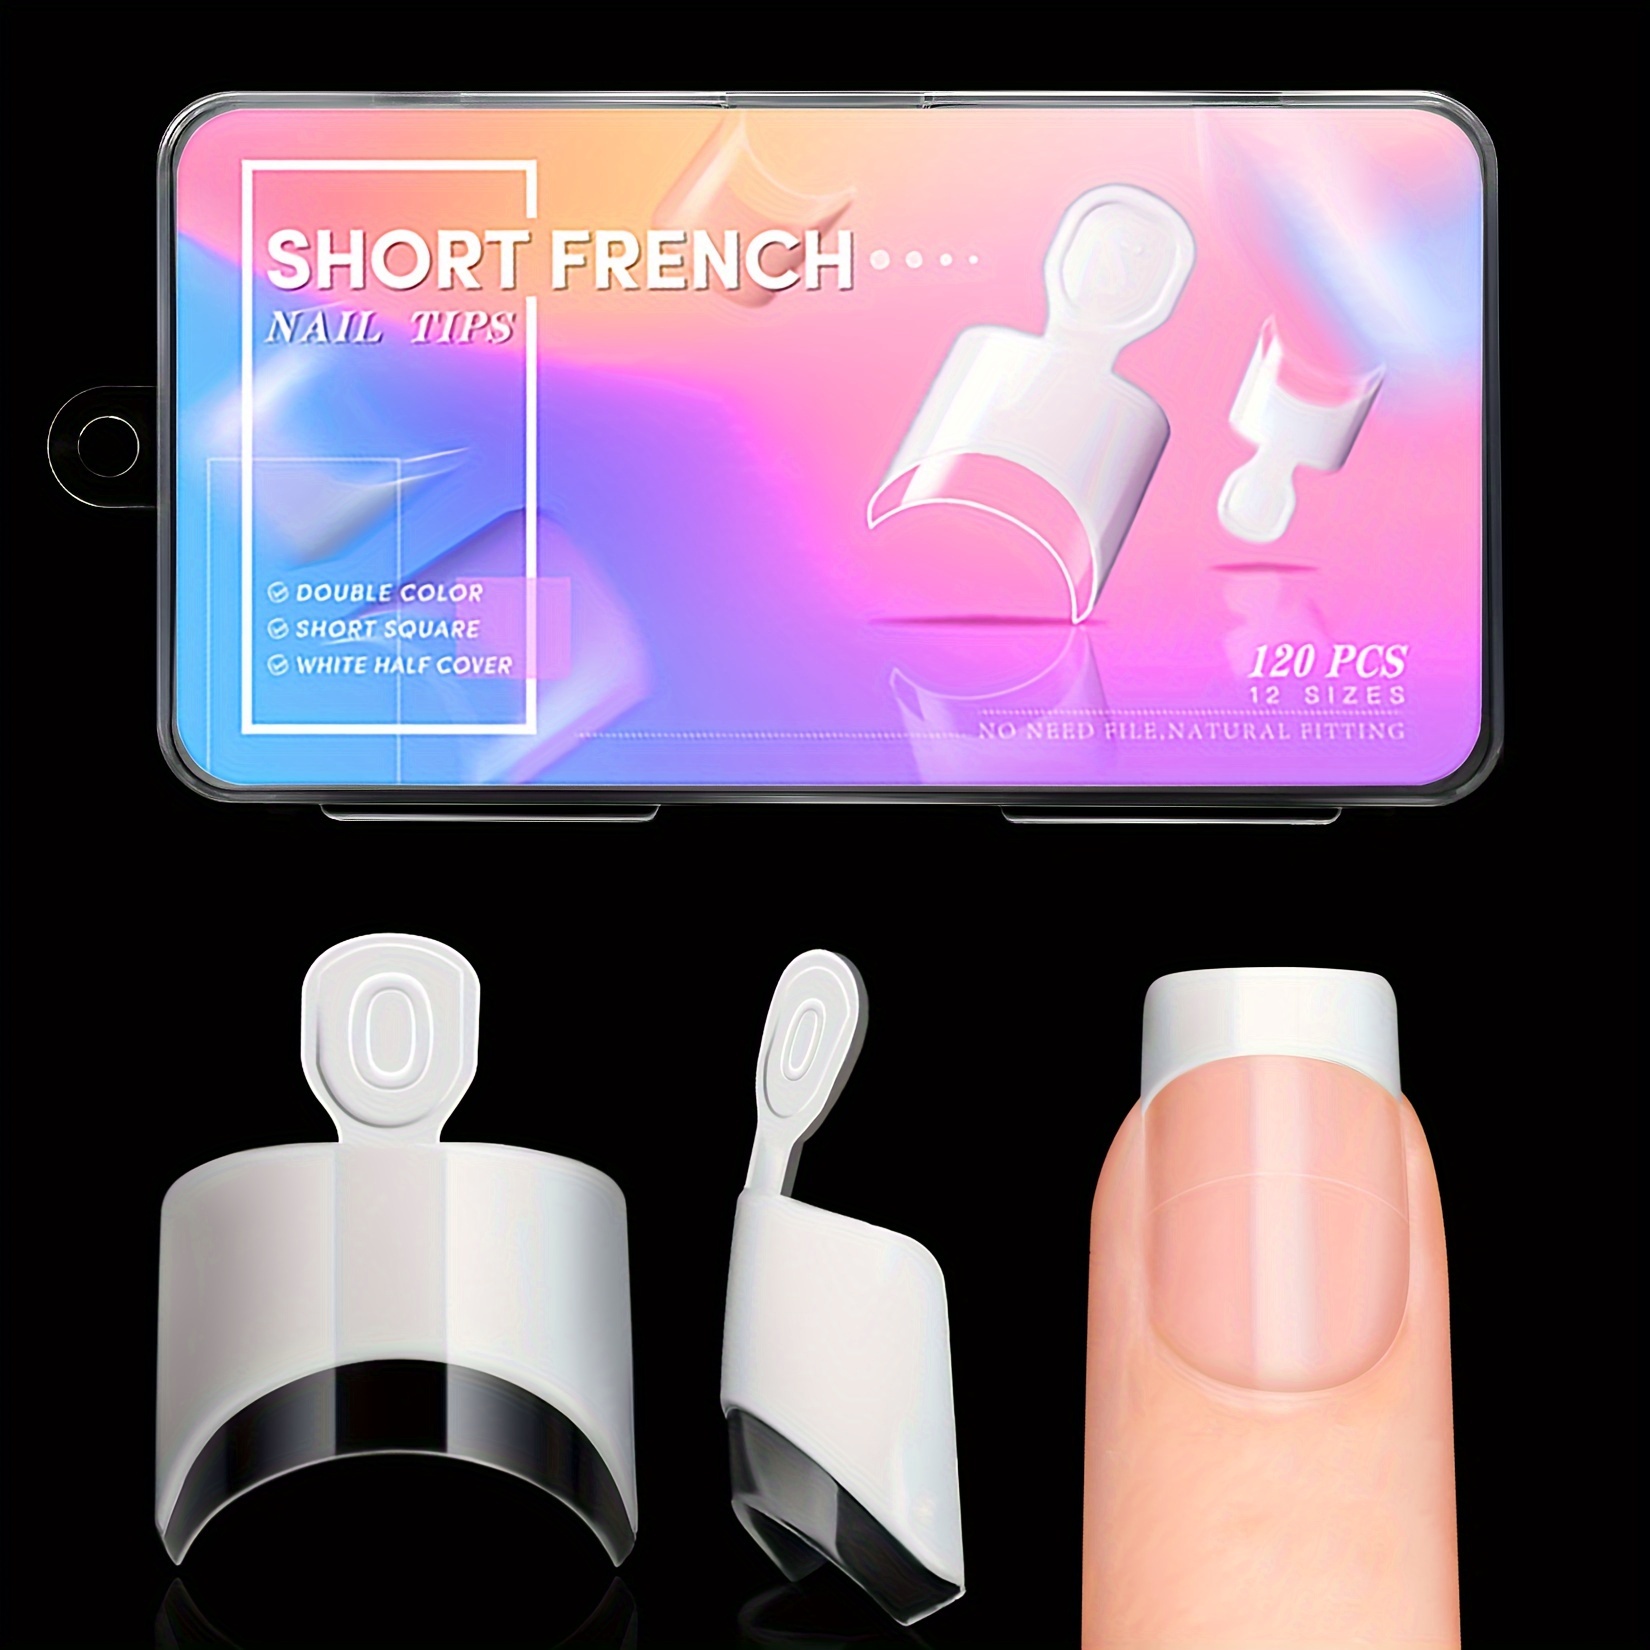 

120 Pcs Short French Nail Tips, Square Shape, Glossy Pure Color Finish With Thick Top & Thin Edge Bottom, Clear & White Half Cover Artificial Nails With Handles, 12 Sizes